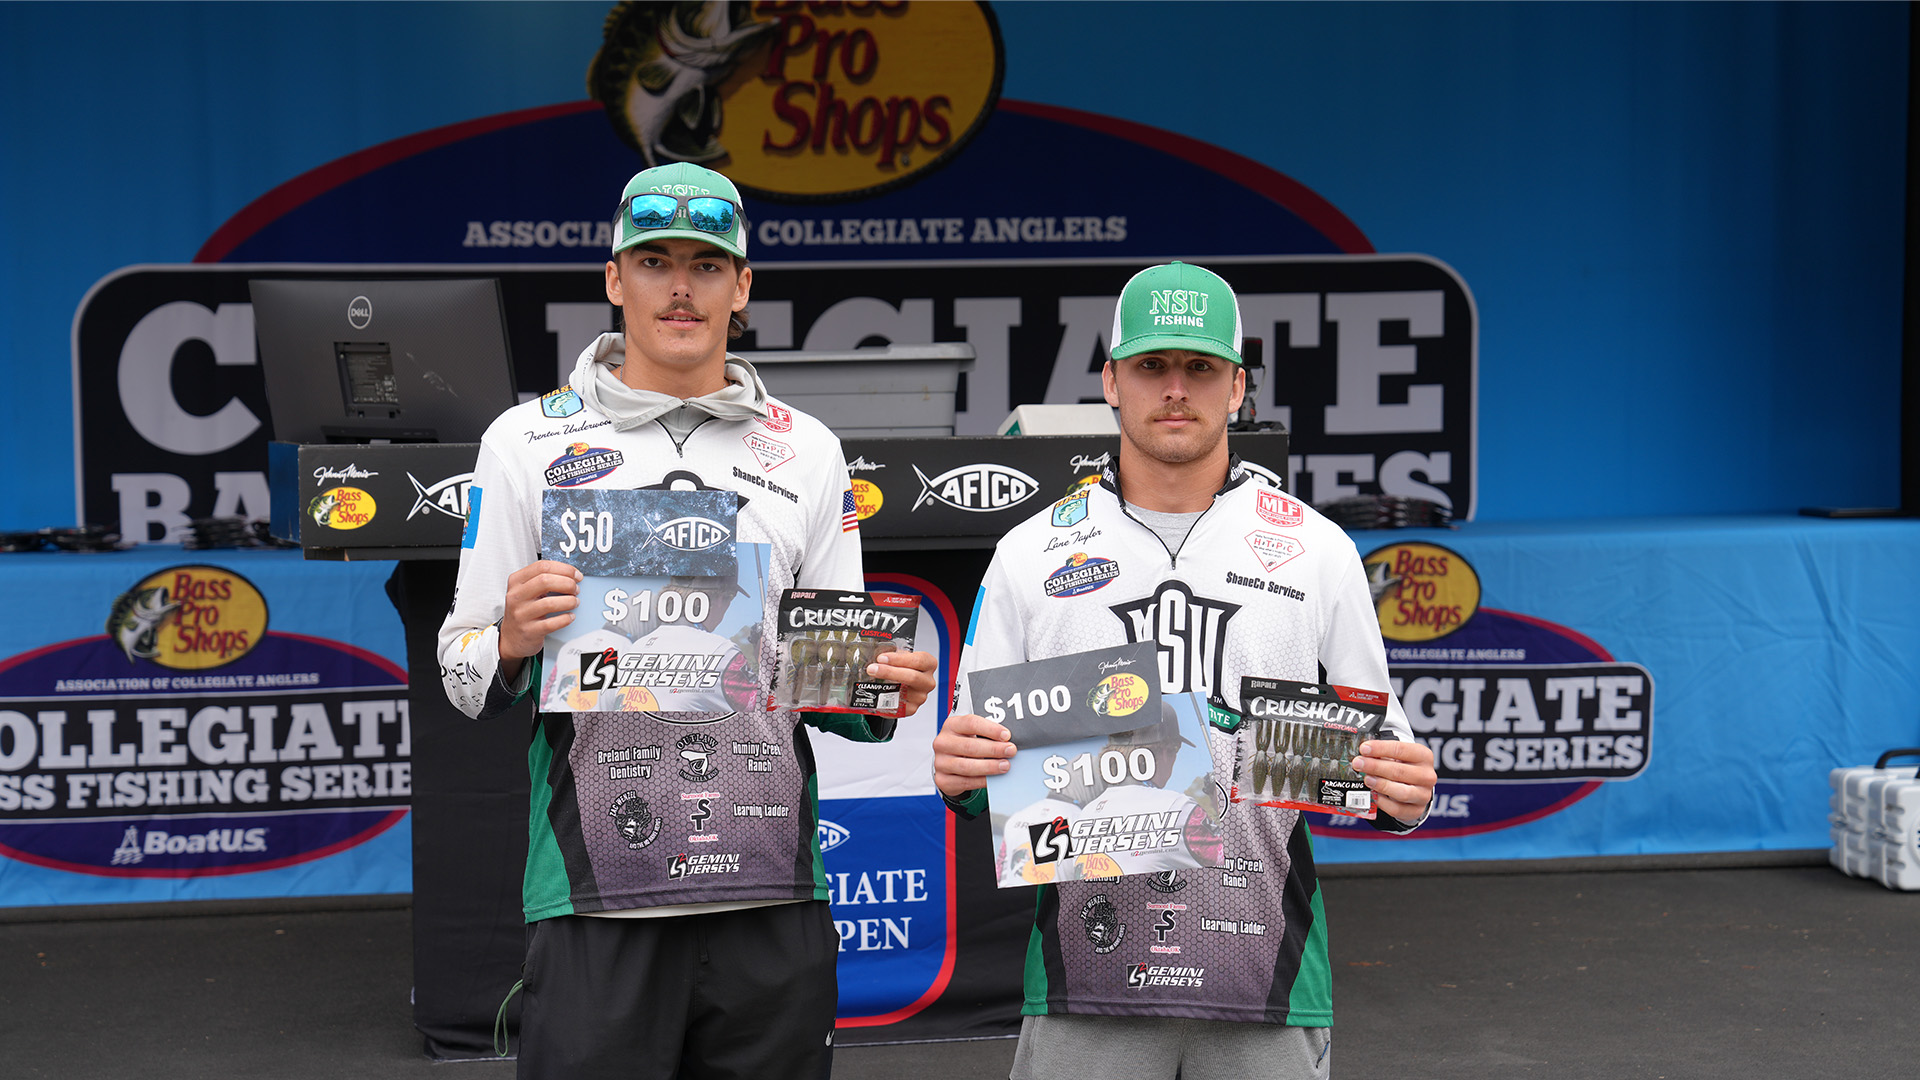 Order New Jerseys for a New School Year - Collegiate Bass Championship